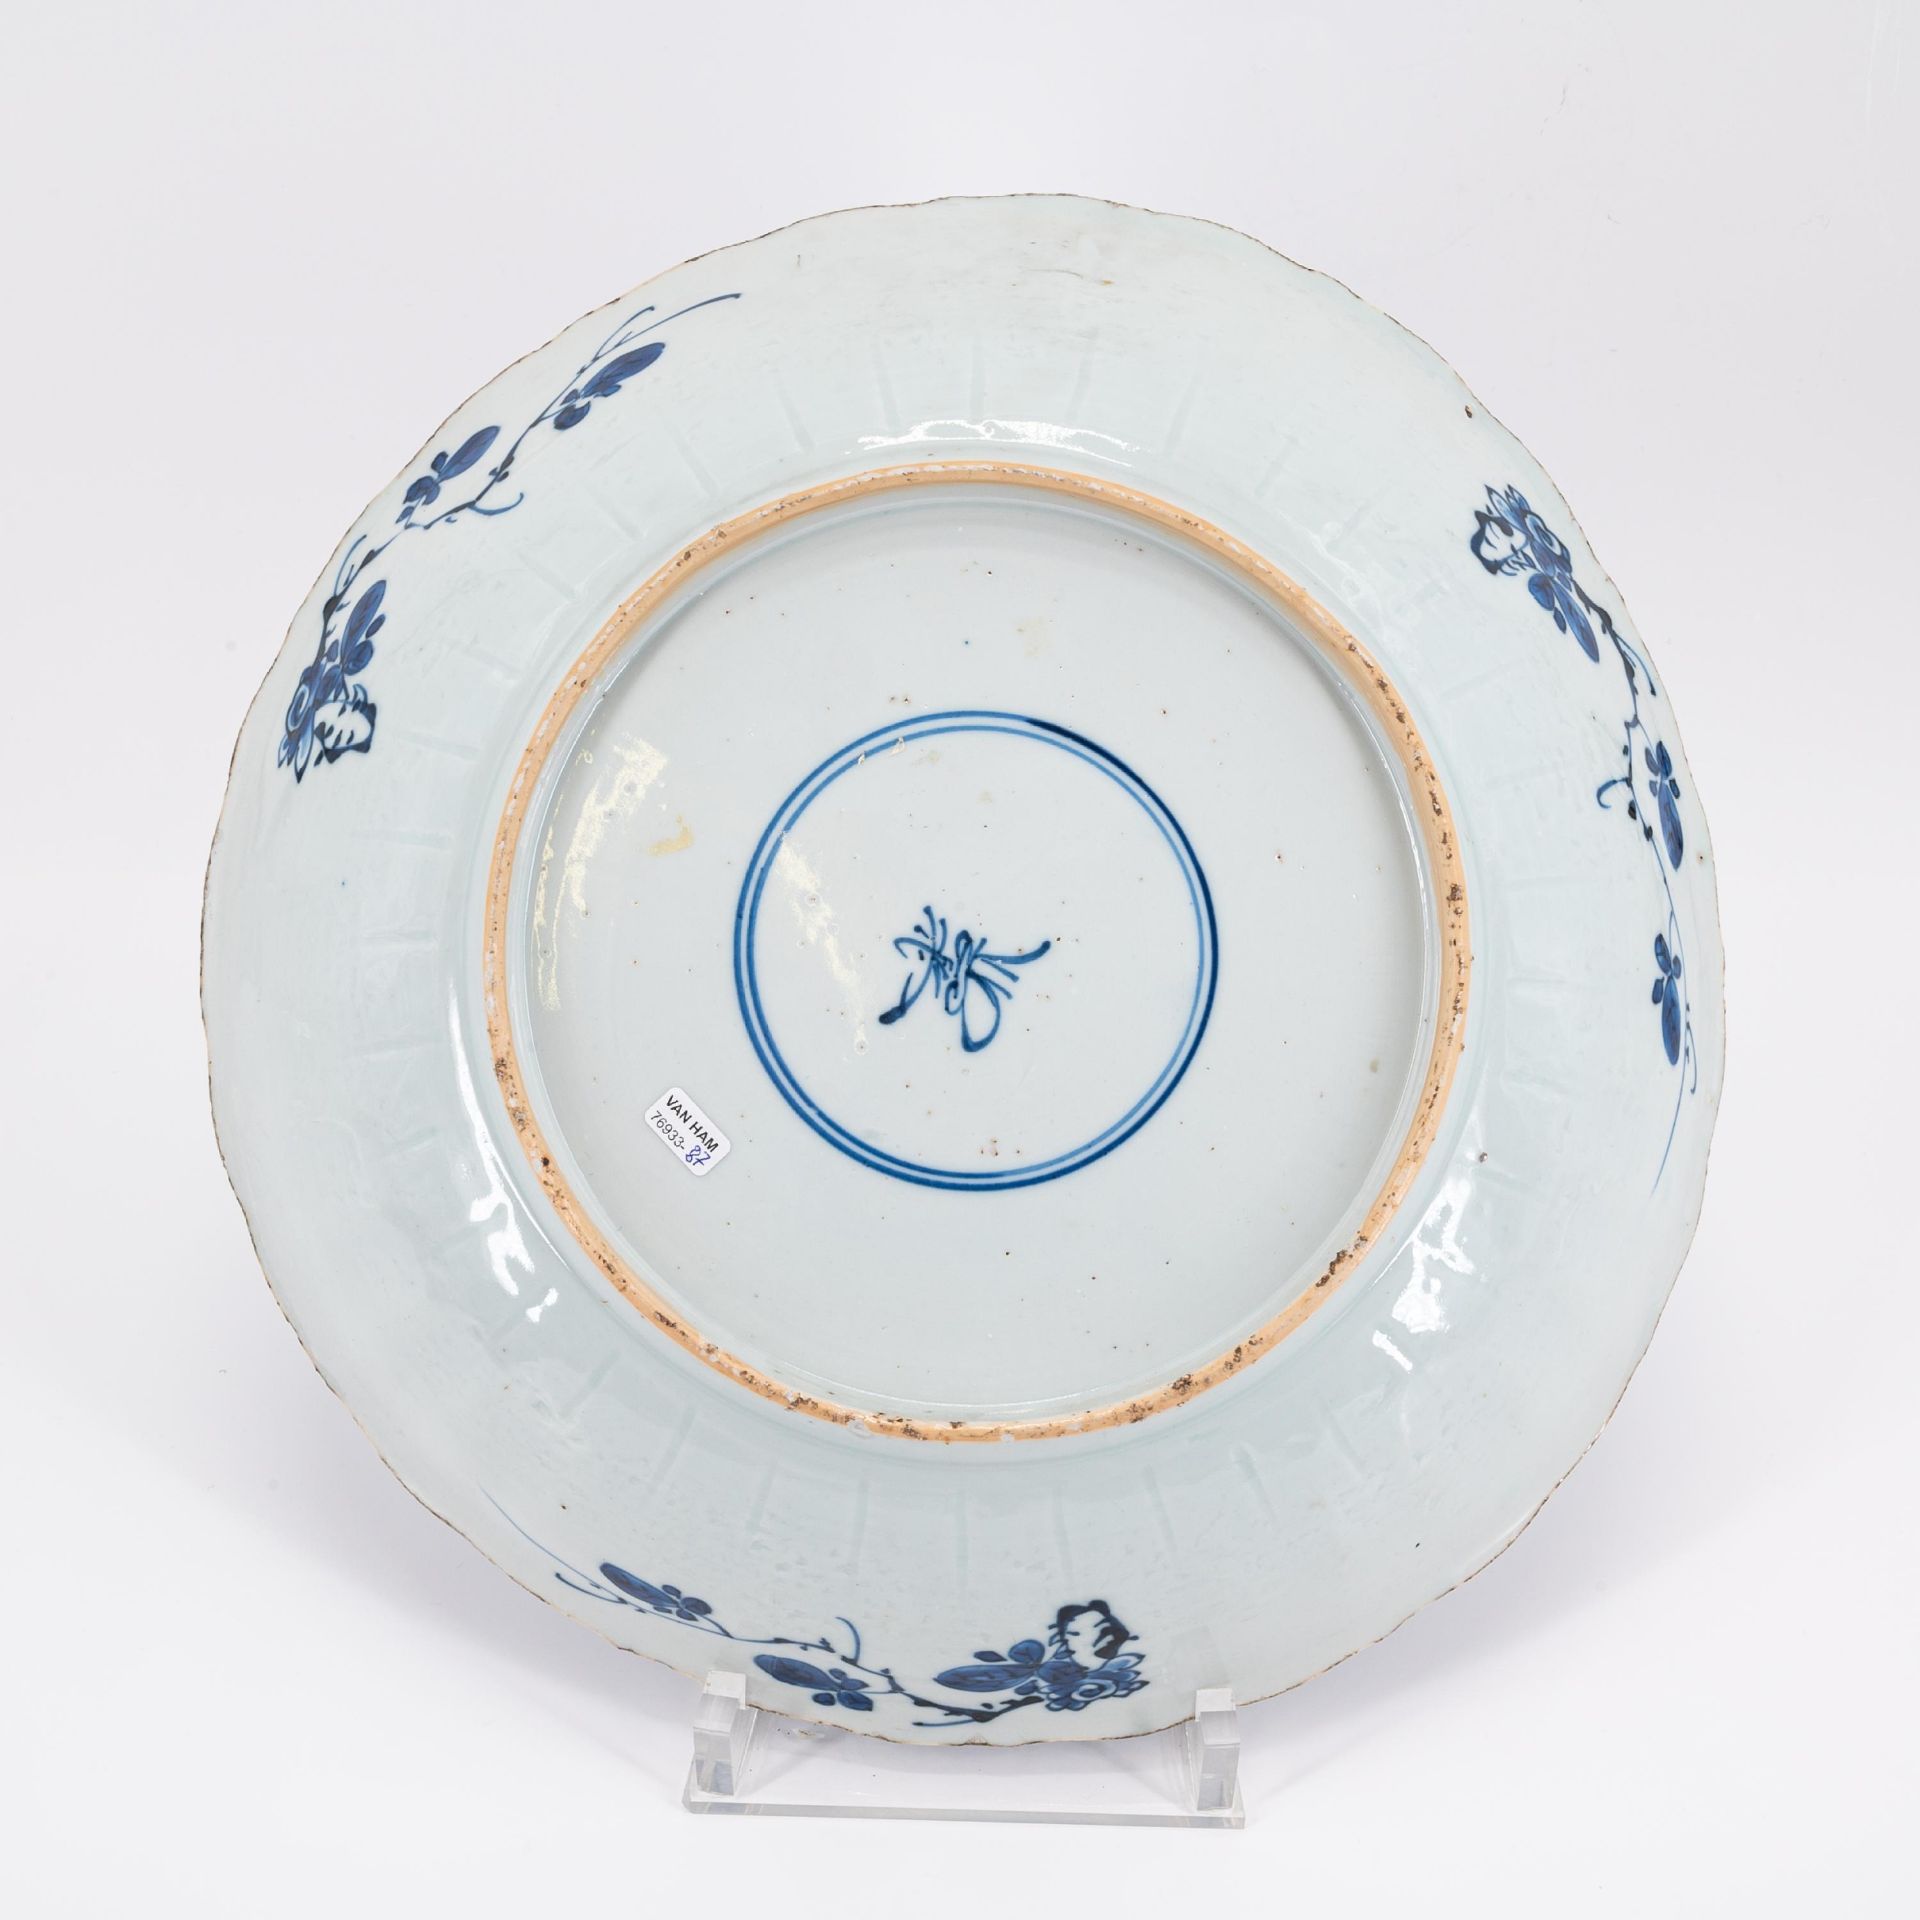 THREE LARGE PORCELAIN DISHES WITH FLOWER BASKET MOTIF - Image 3 of 3